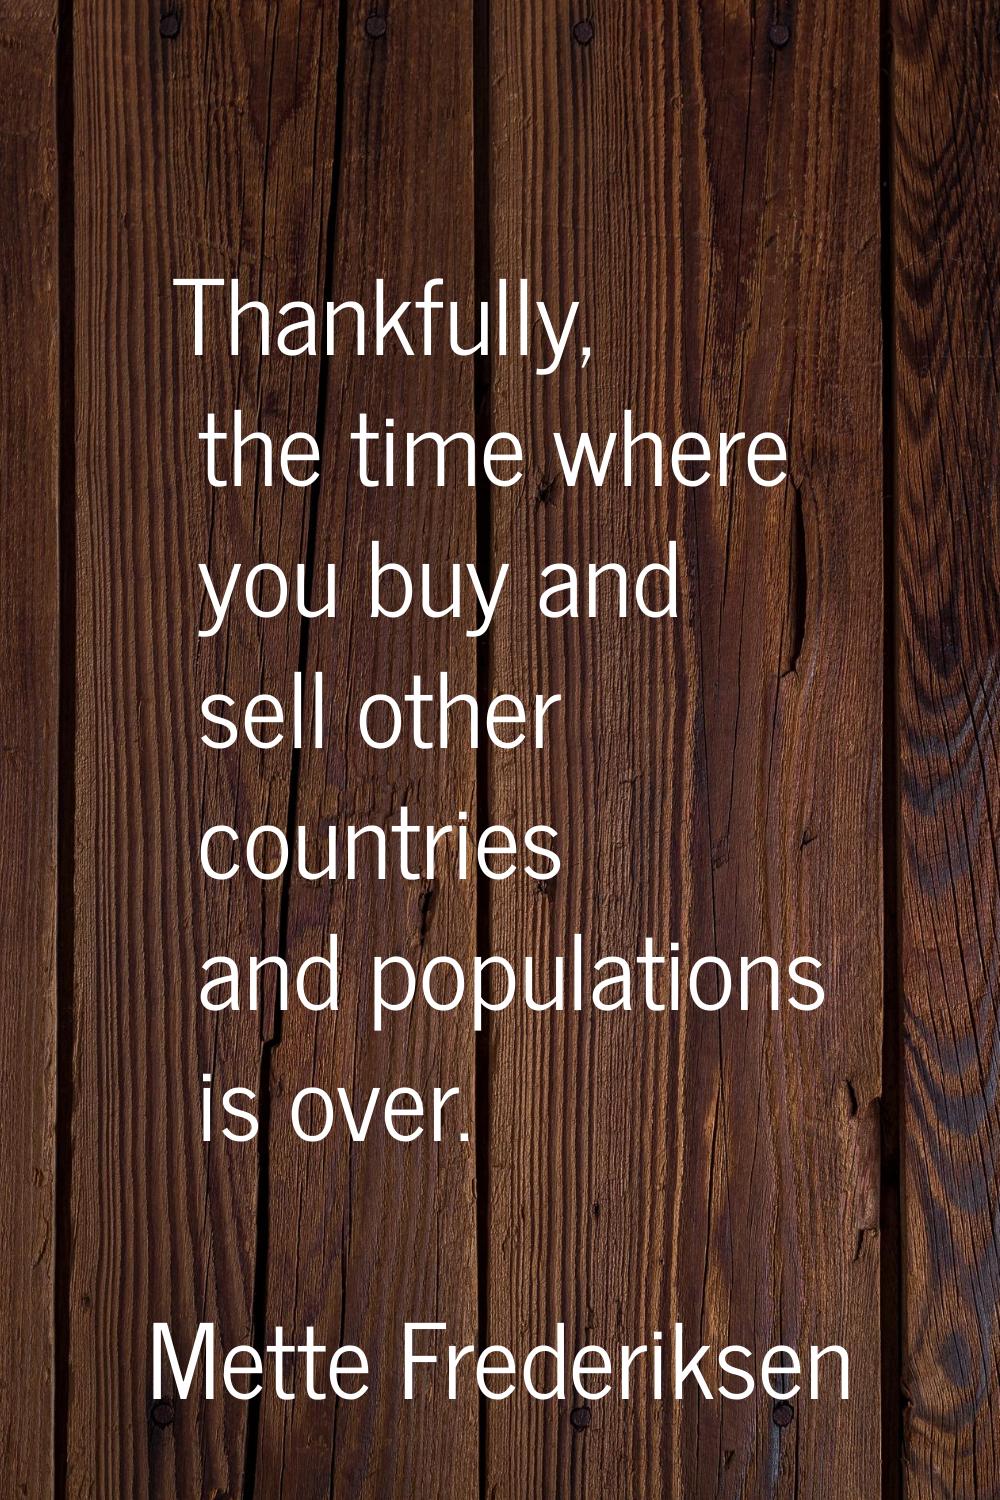 Thankfully, the time where you buy and sell other countries and populations is over.